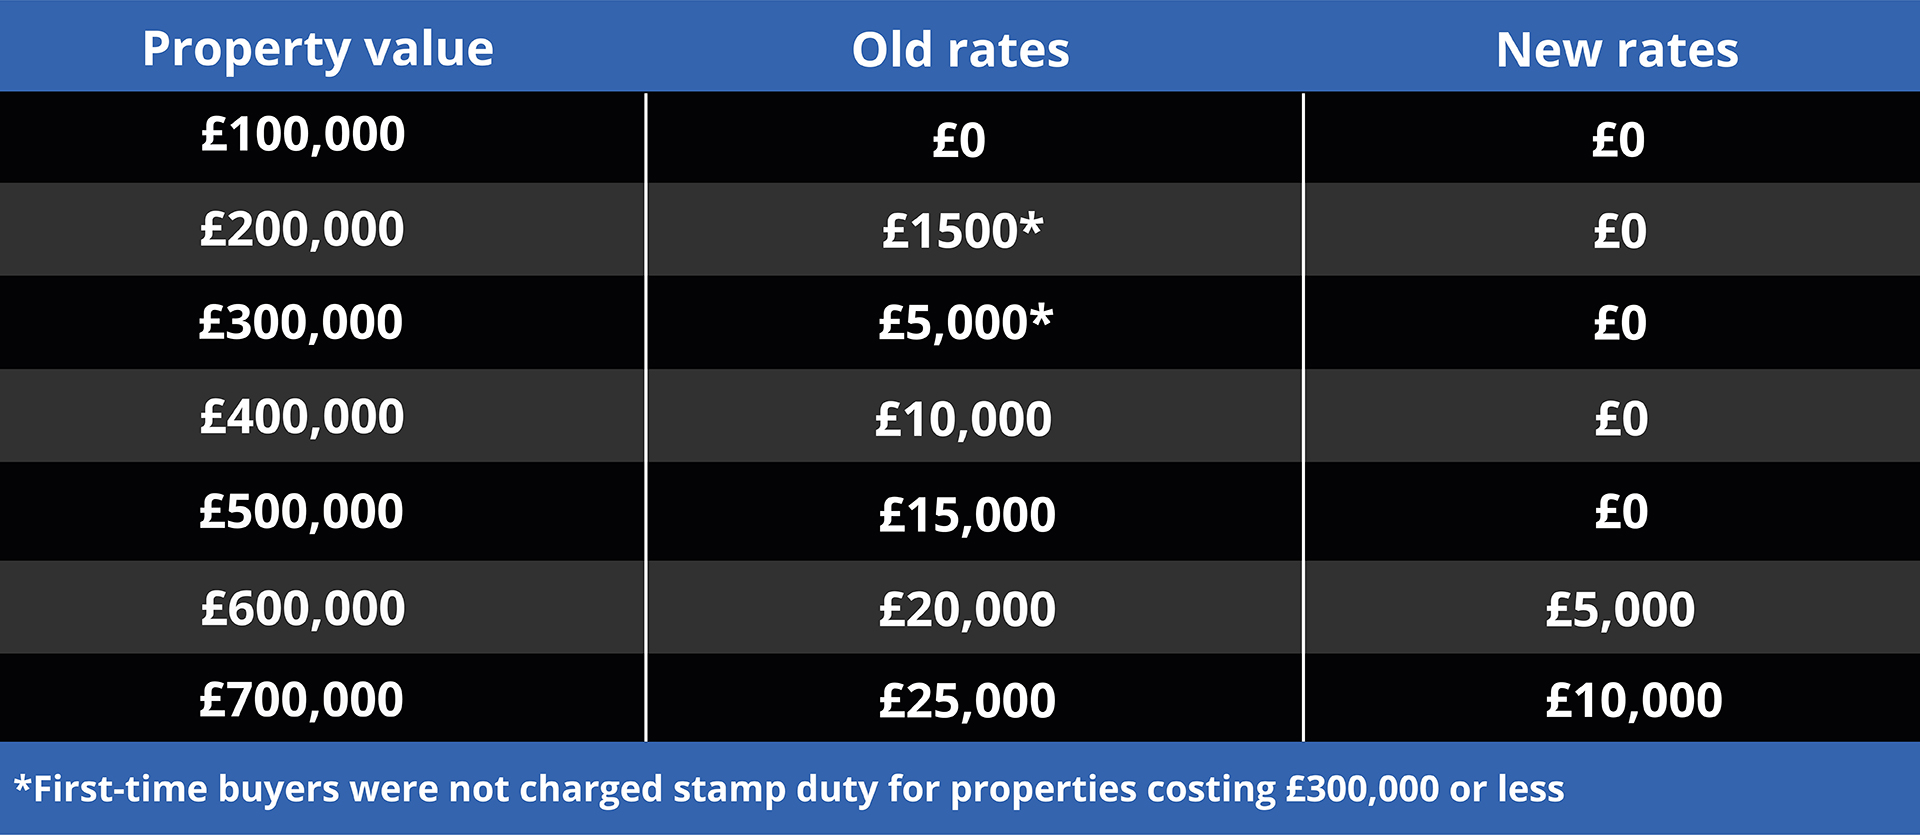 Stamp duty - old vs temporary rates